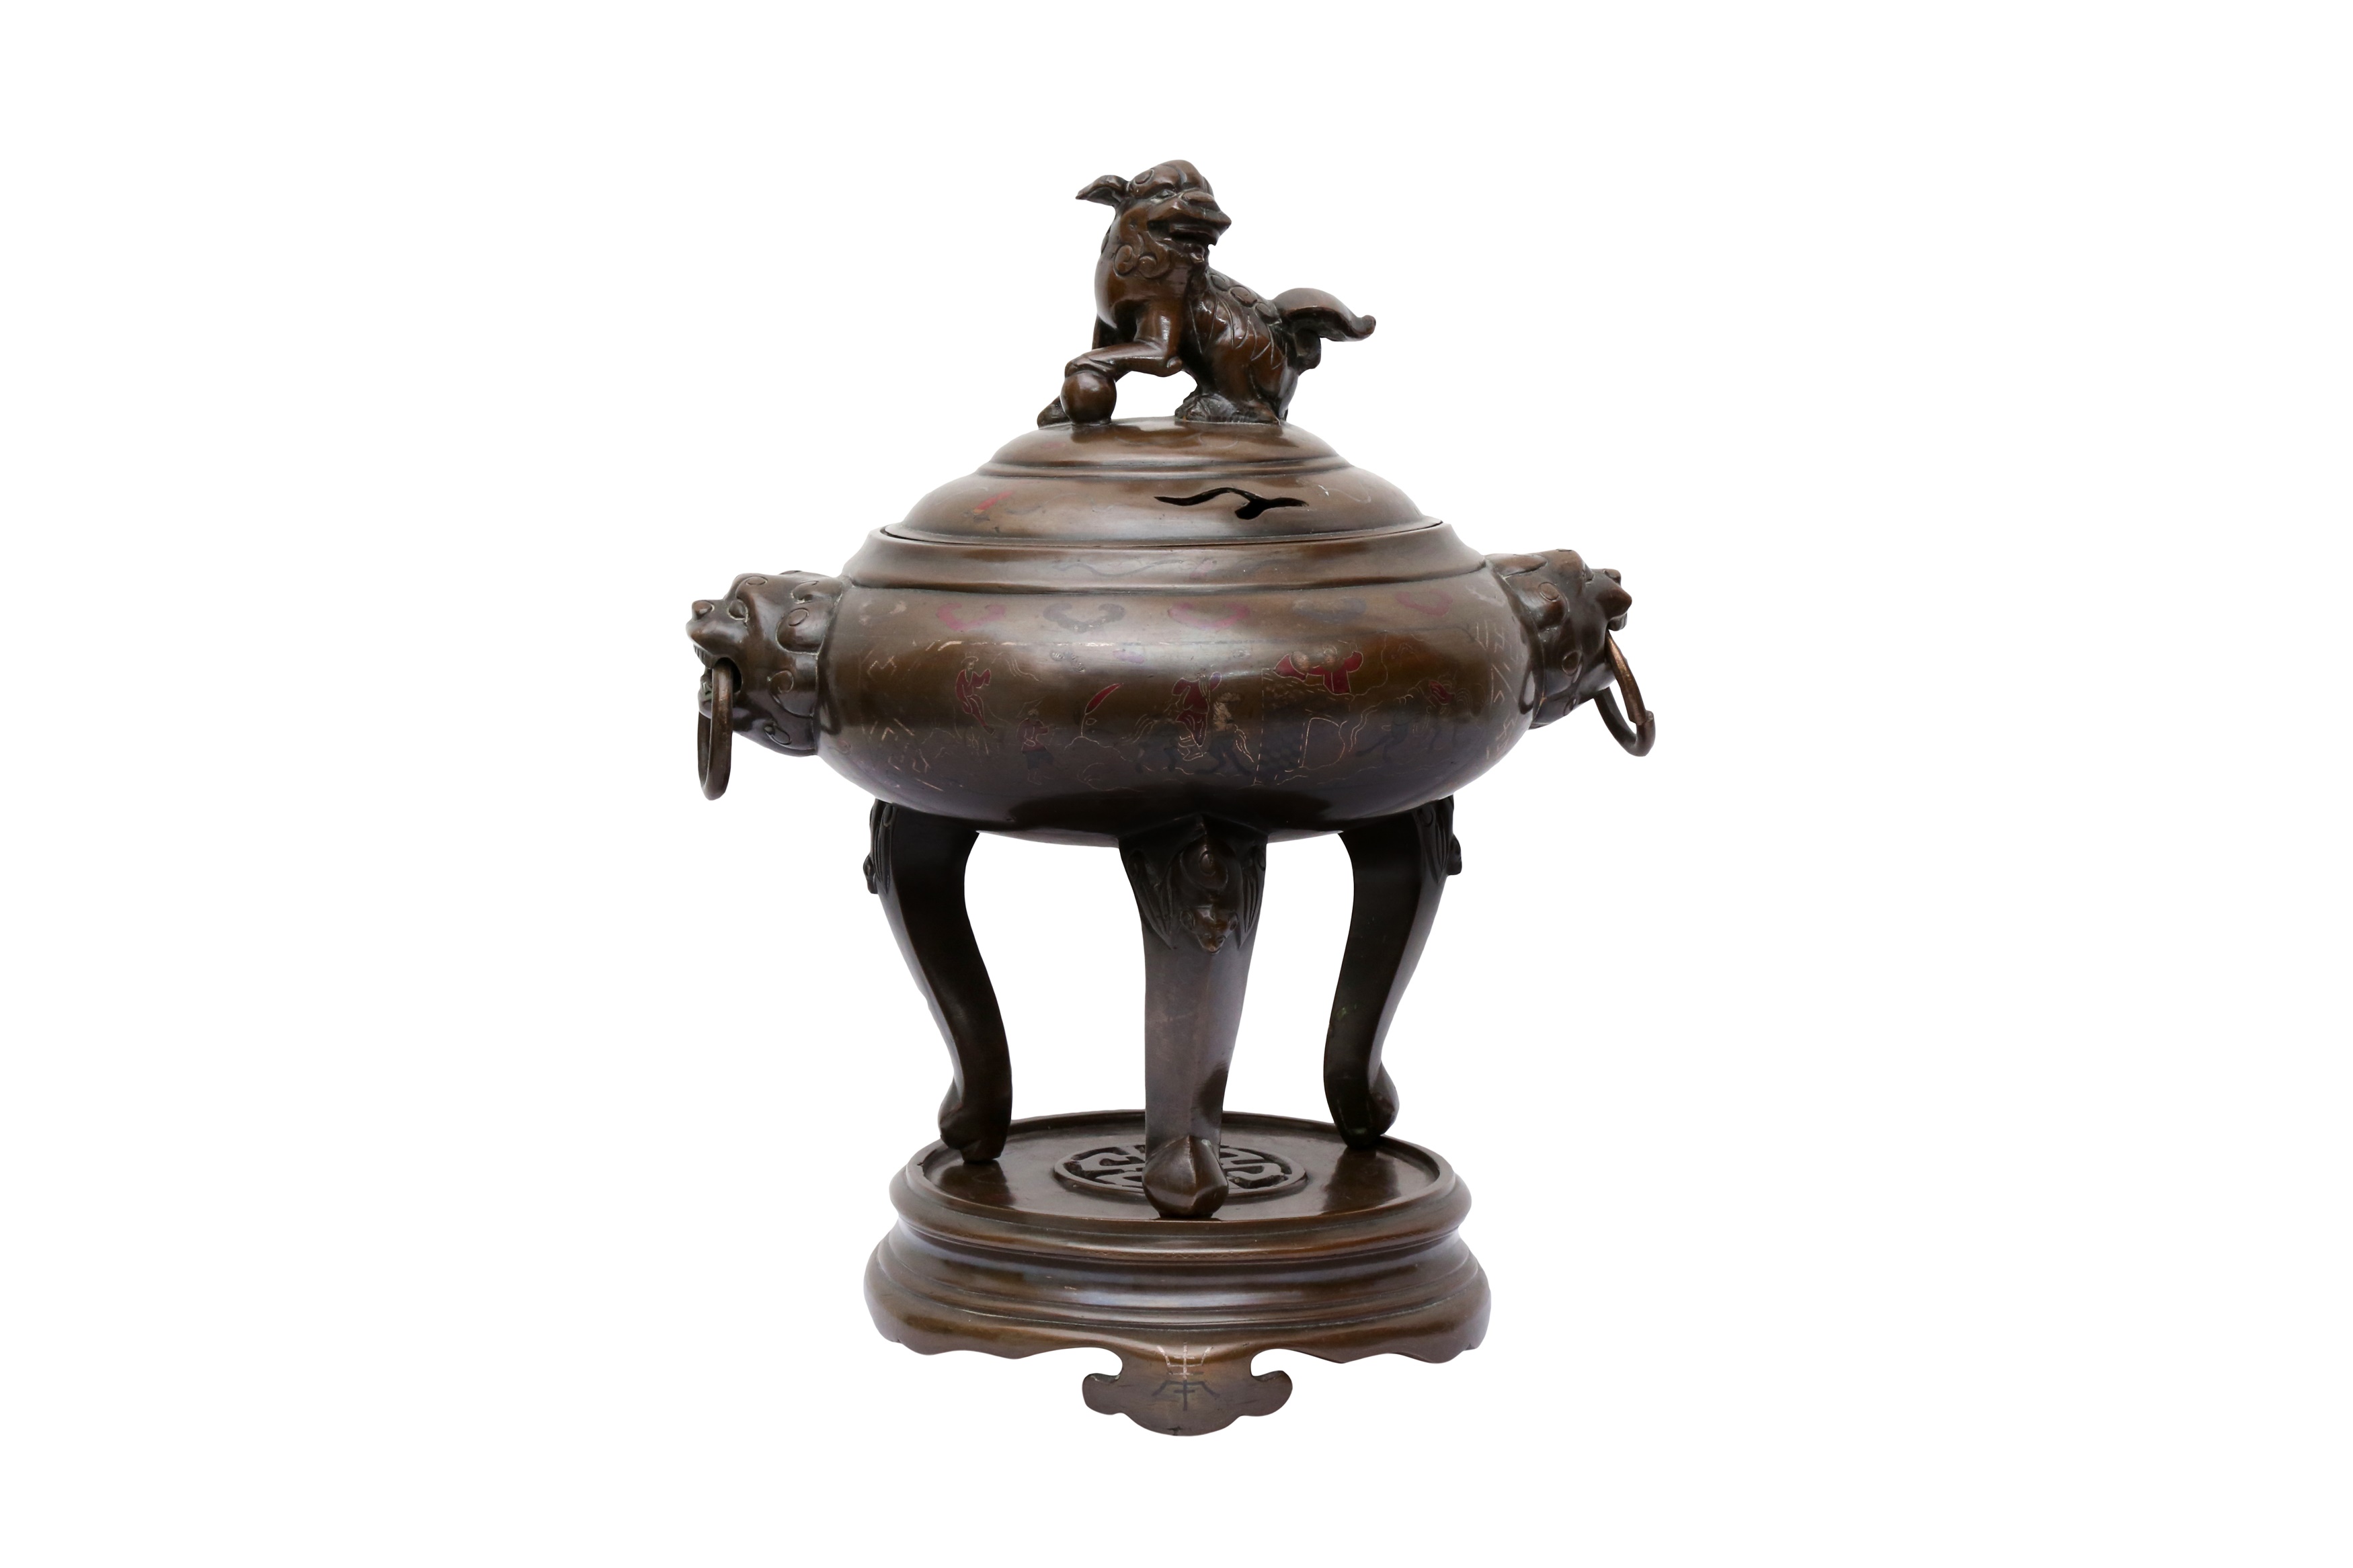 A VIETNAMESE SILVER- AND COPPER-INLAID BRONZE CENSER, COVER AND STAND